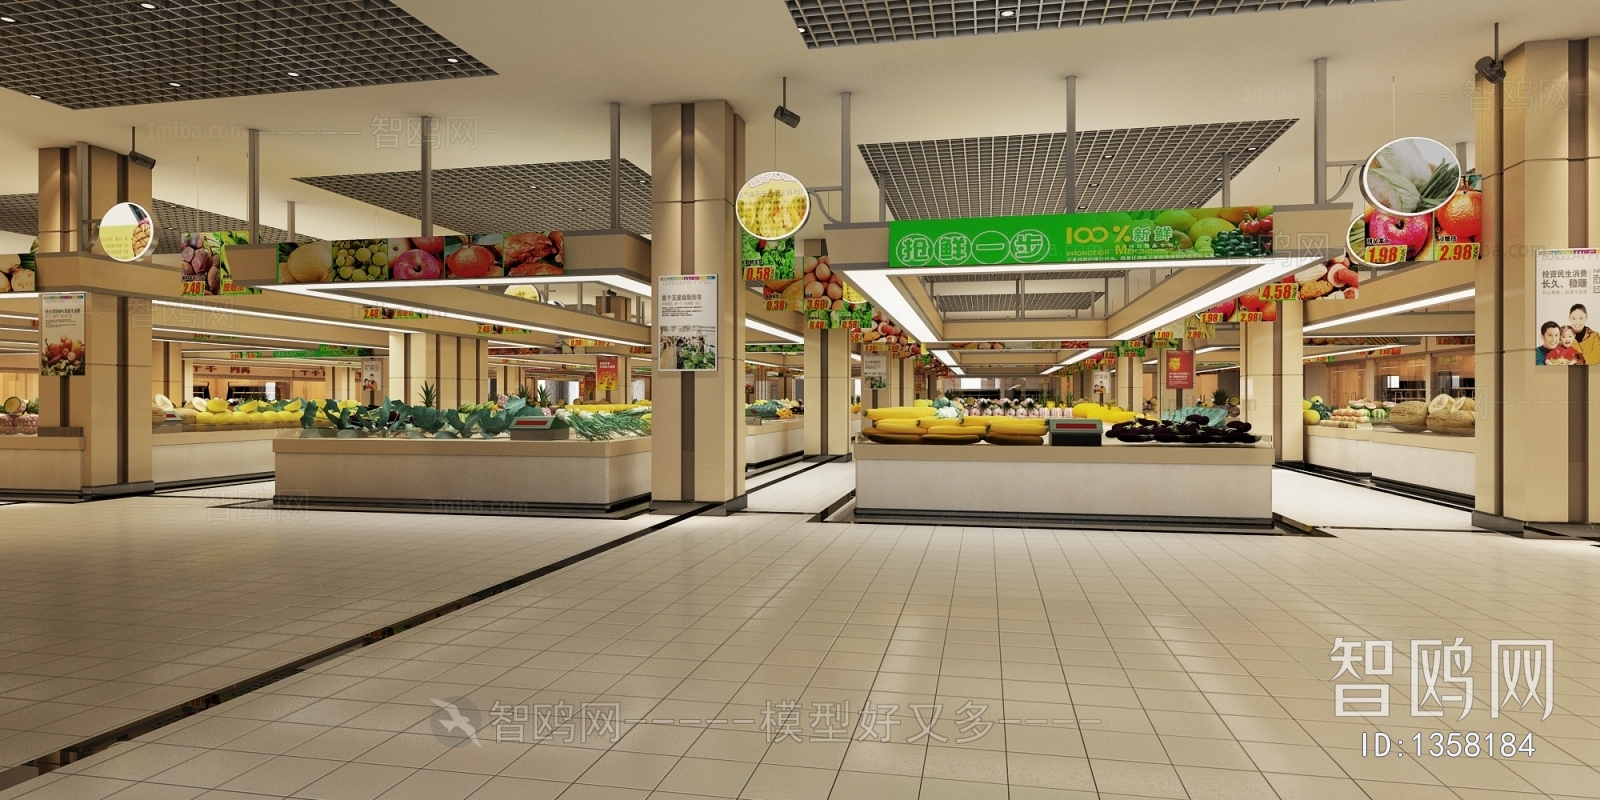 Modern Shopping Malls And Supermarkets